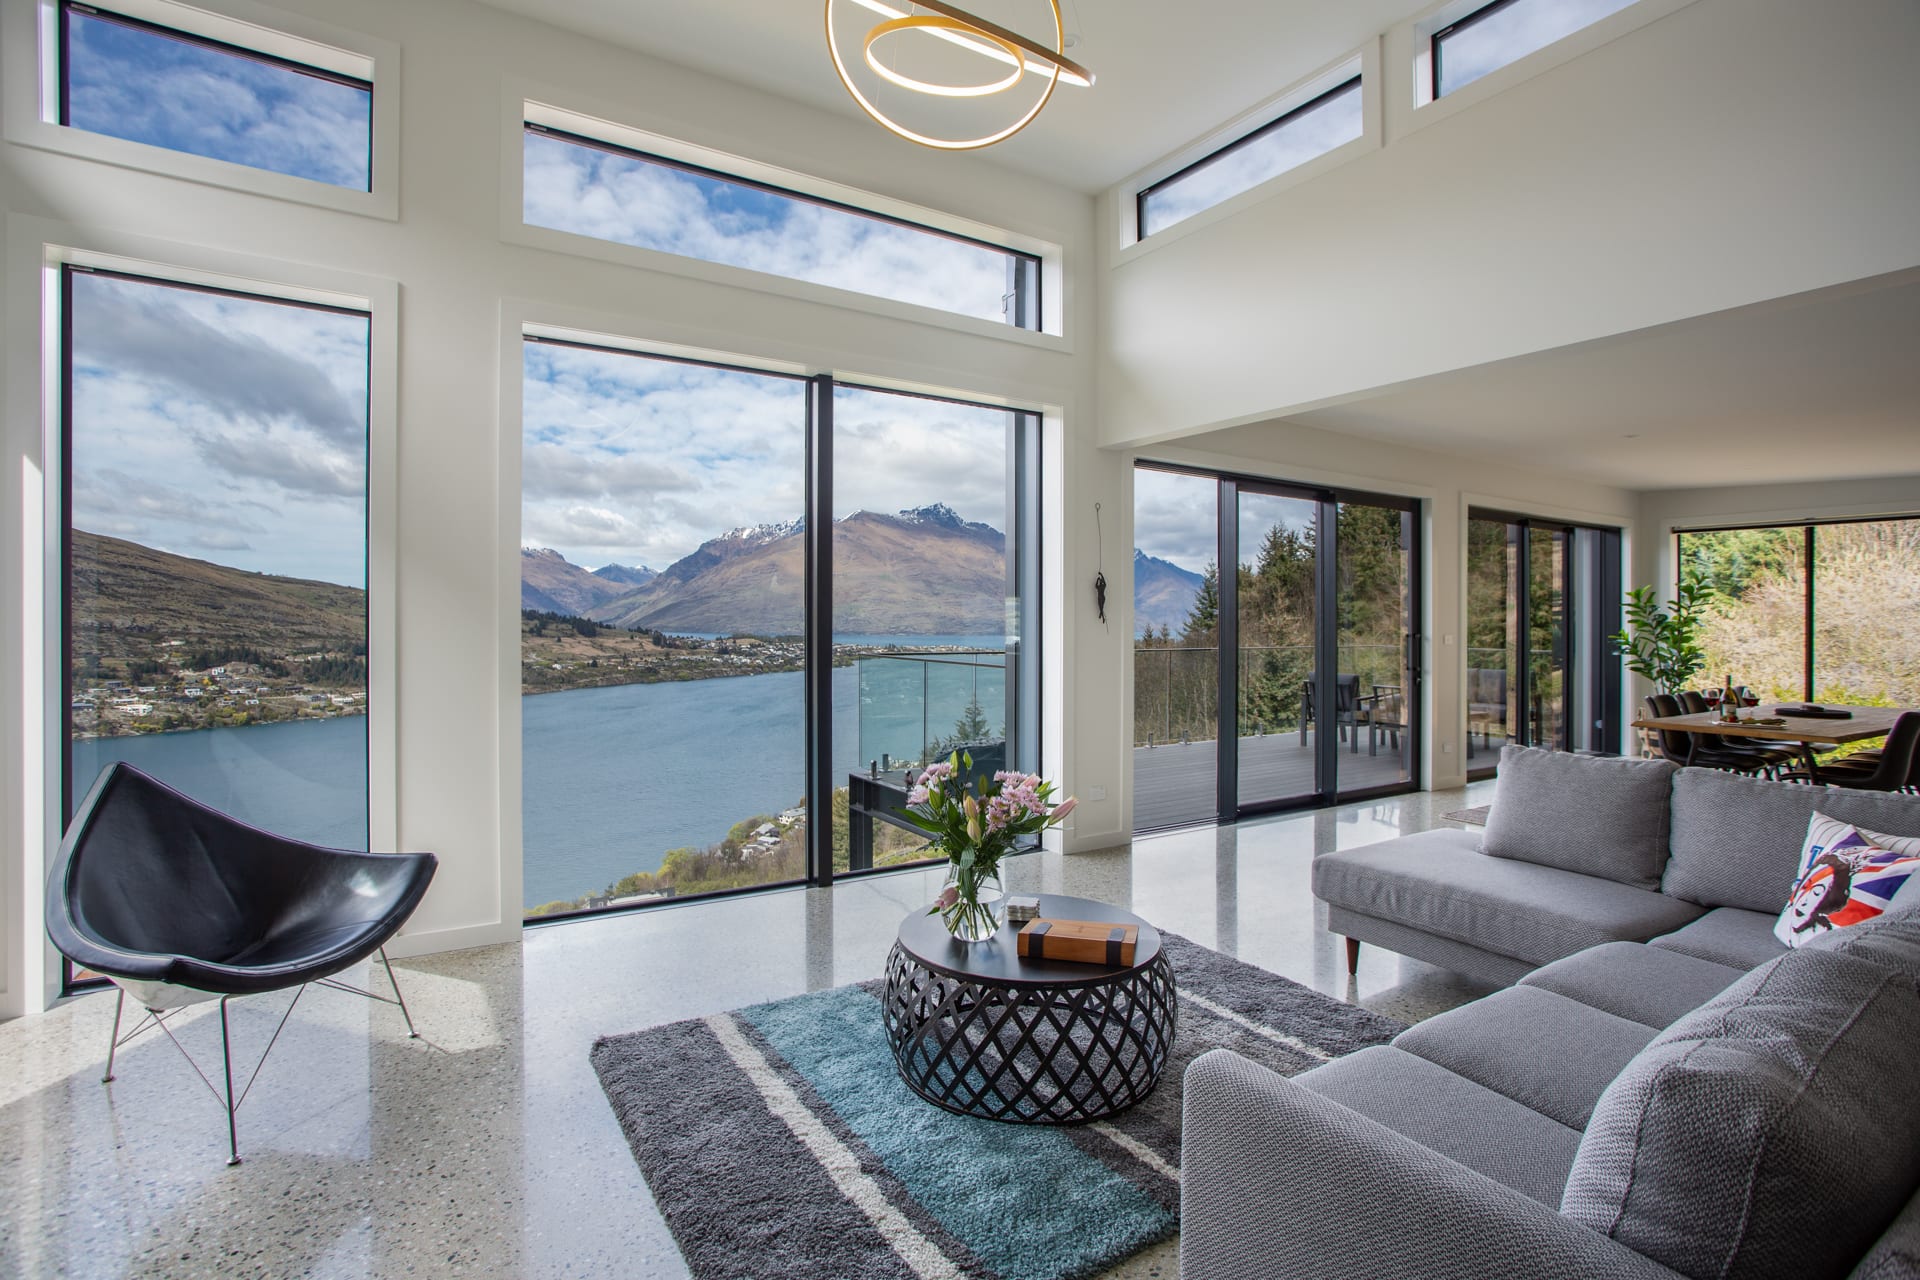 A gorgeous living room with views to die for